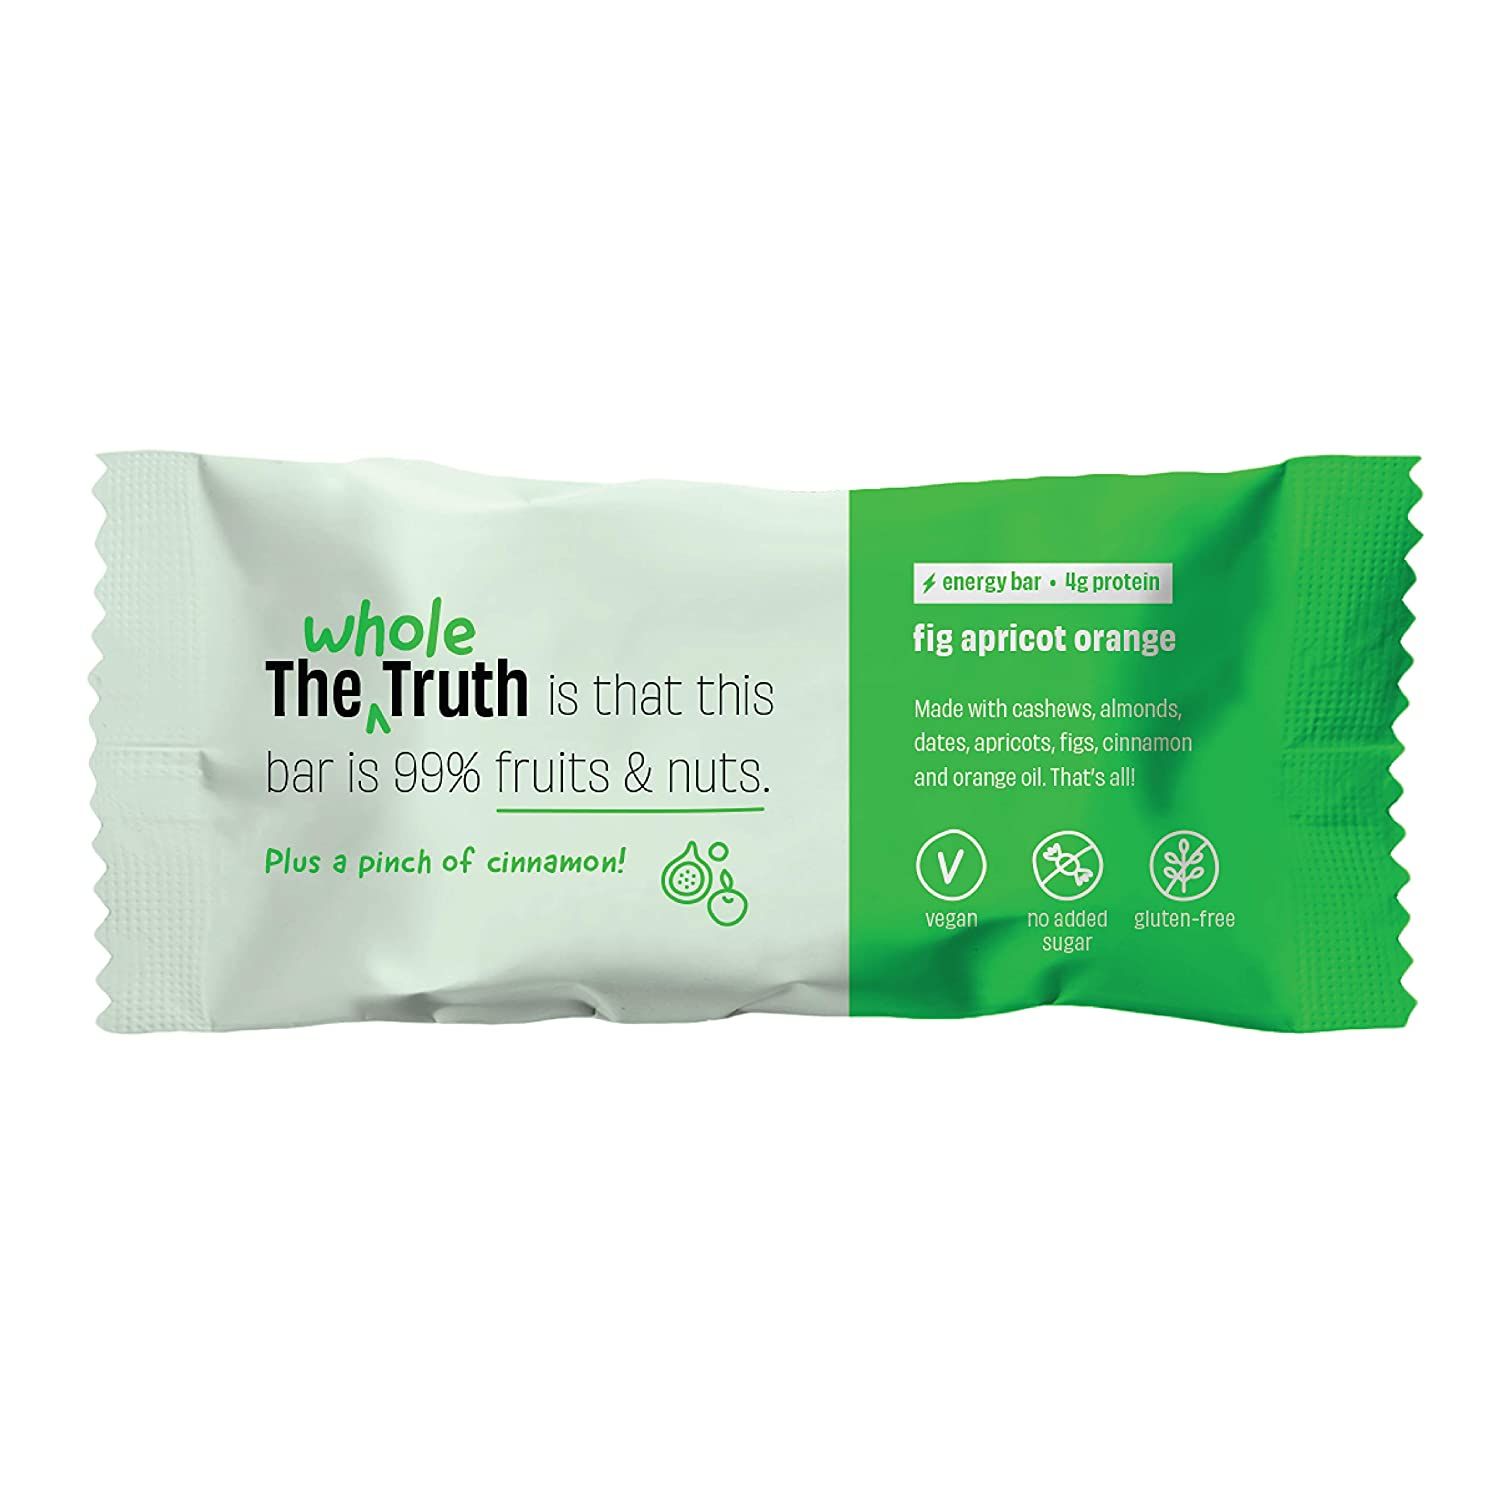 The Whole Truth Energy Bars Fig Apricot and Orange Image